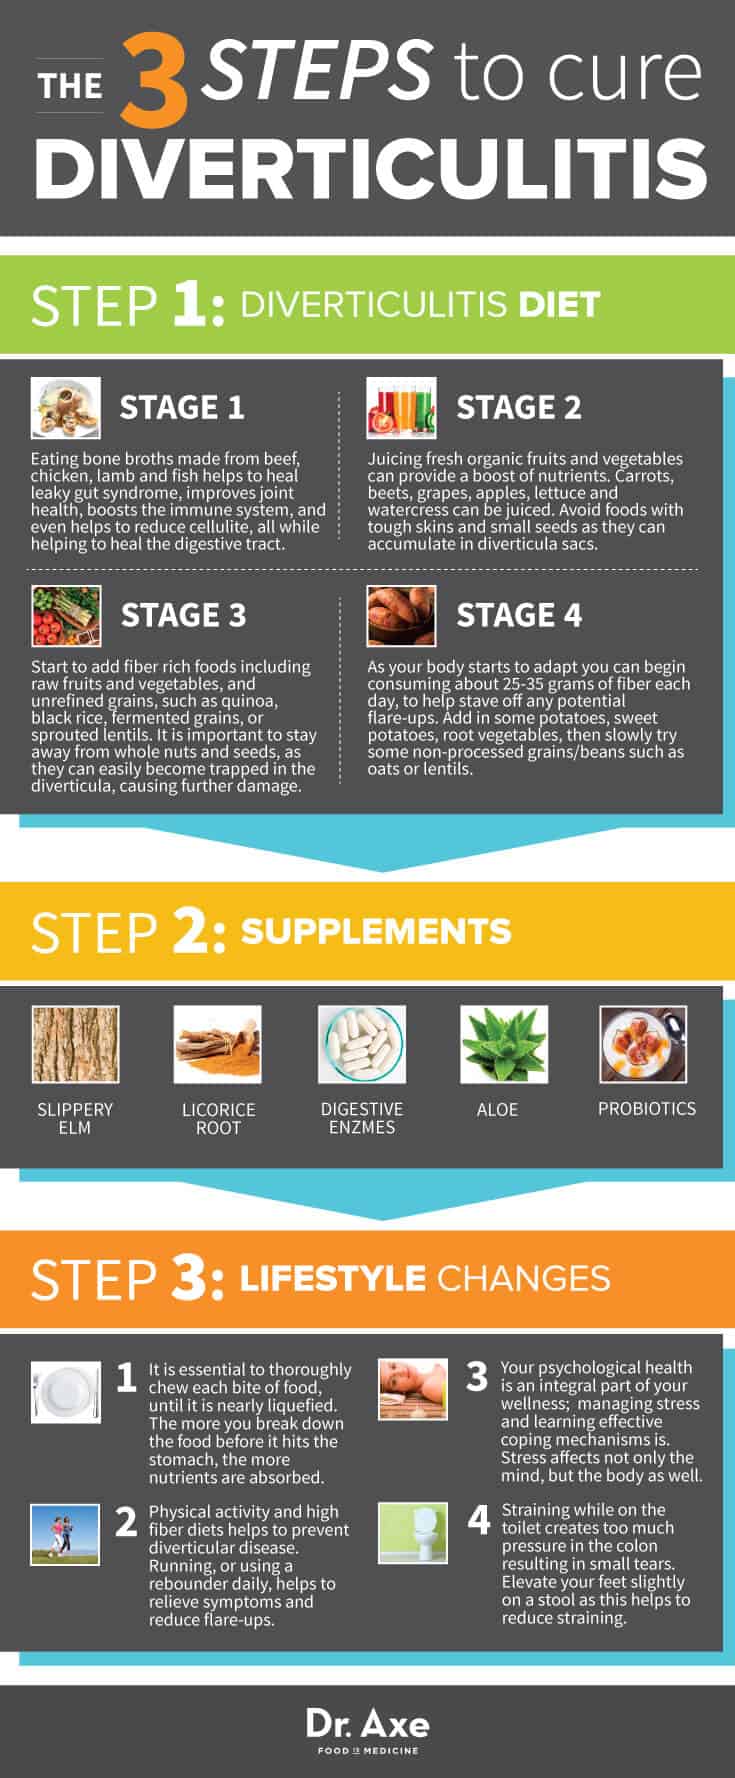 Diverticulitis Diet Cure Infographic Steps 